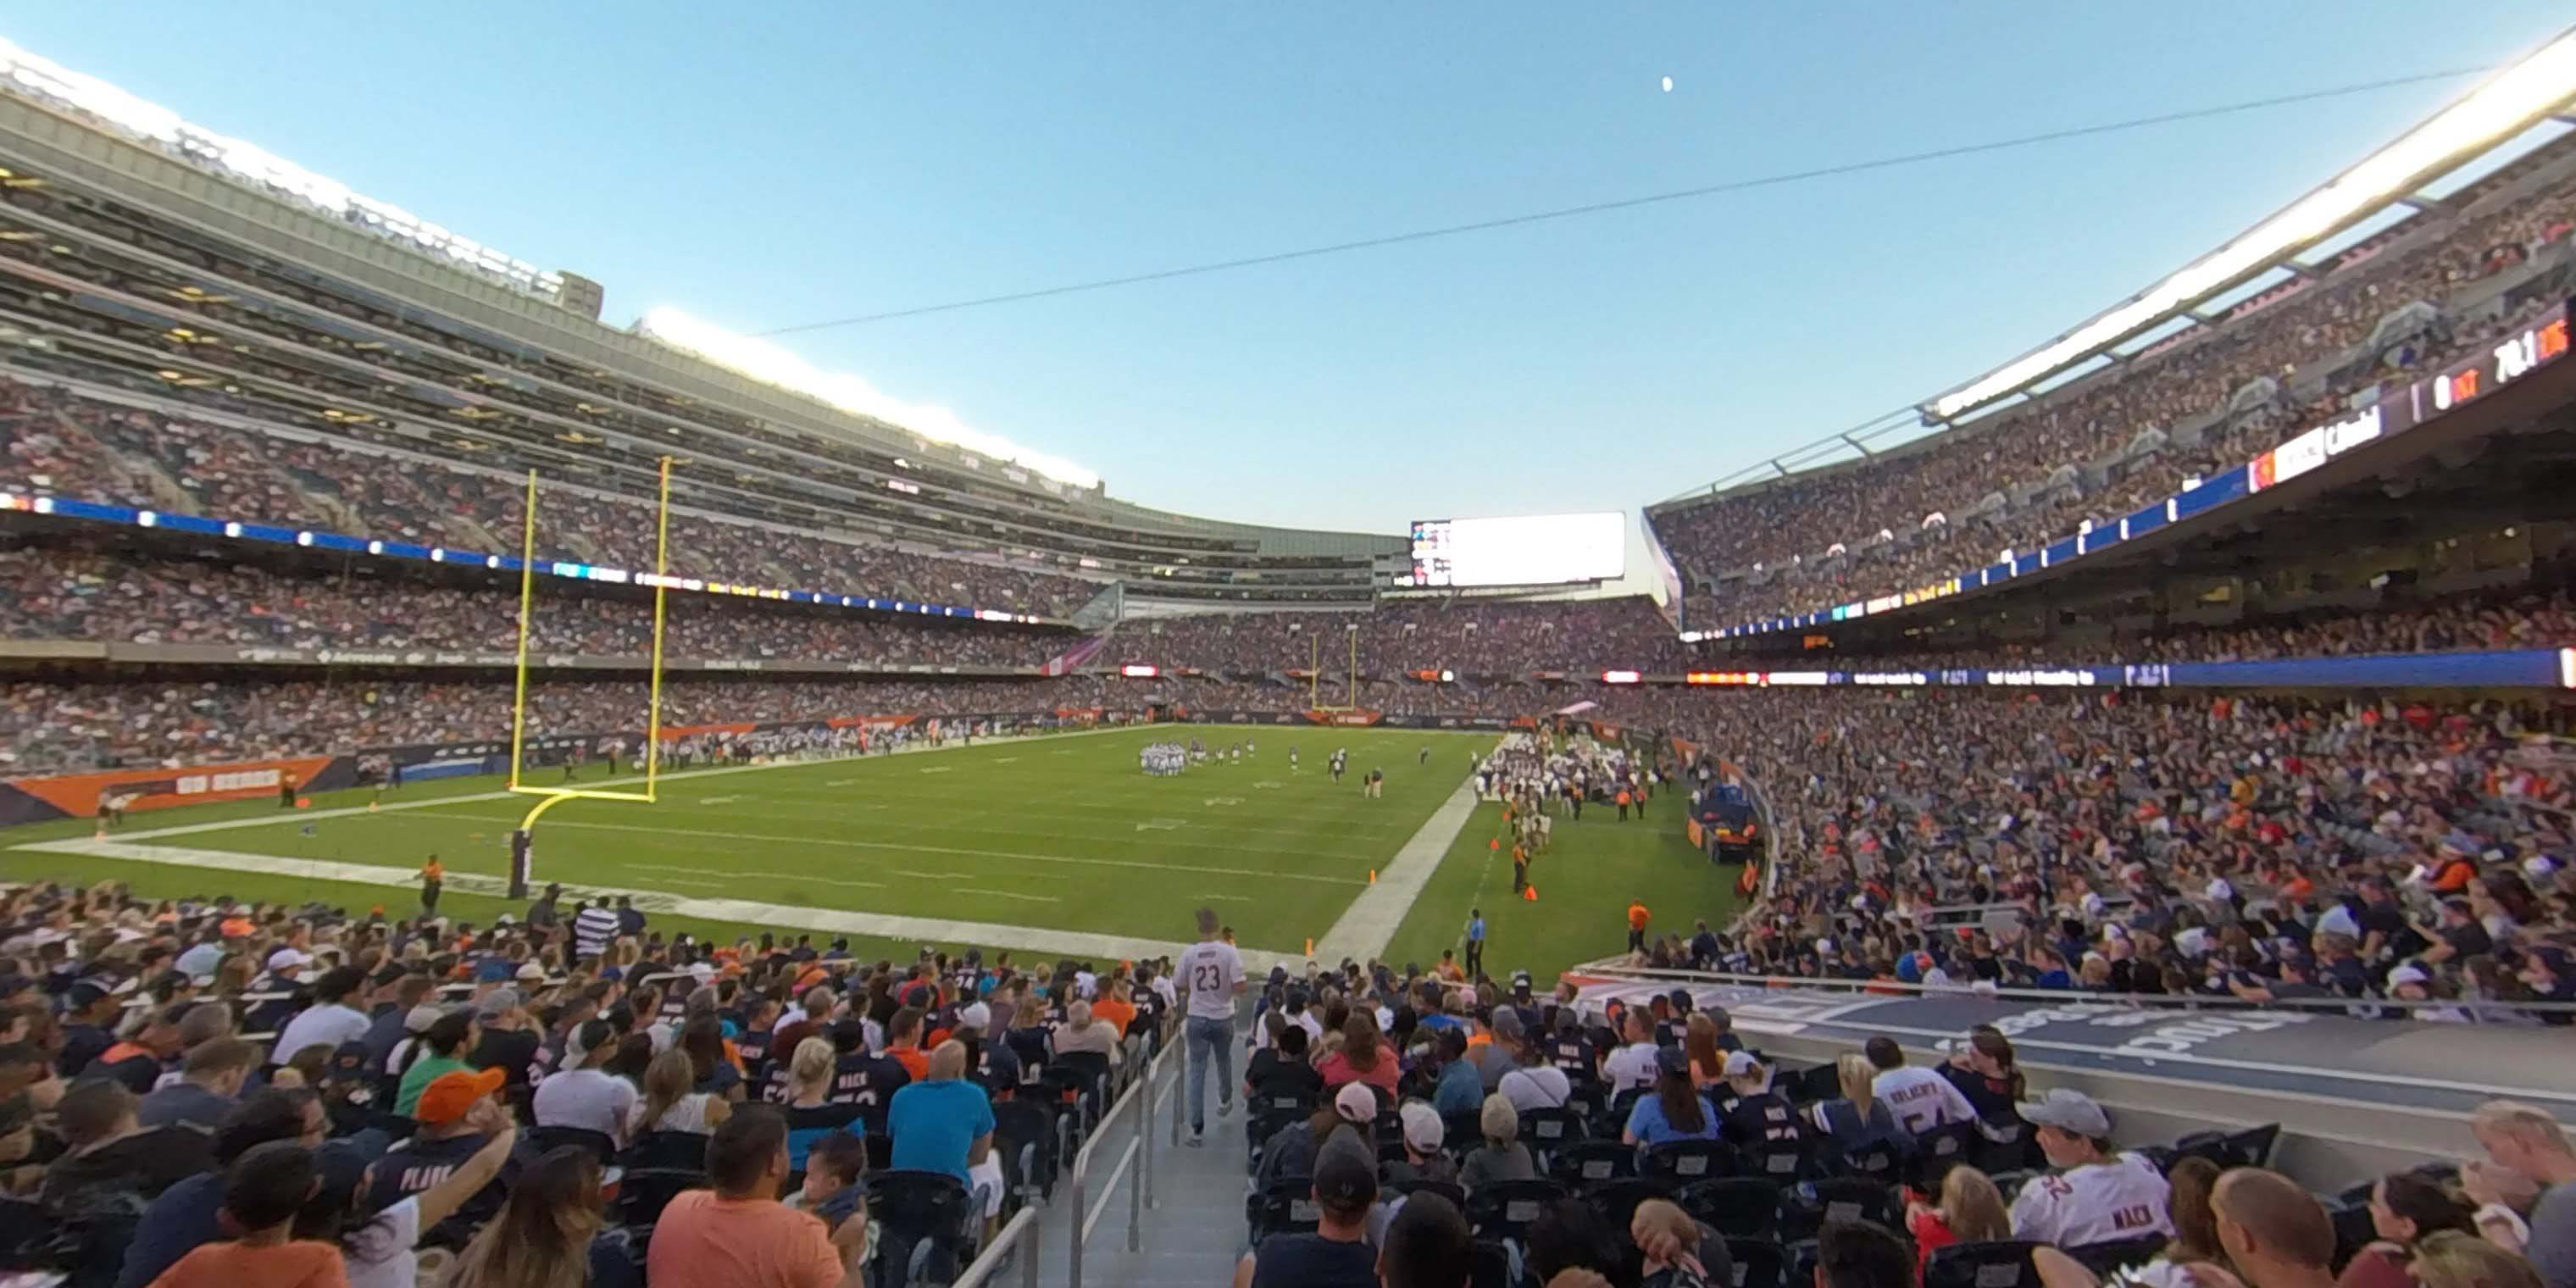 section 148 panoramic seat view  for football - soldier field